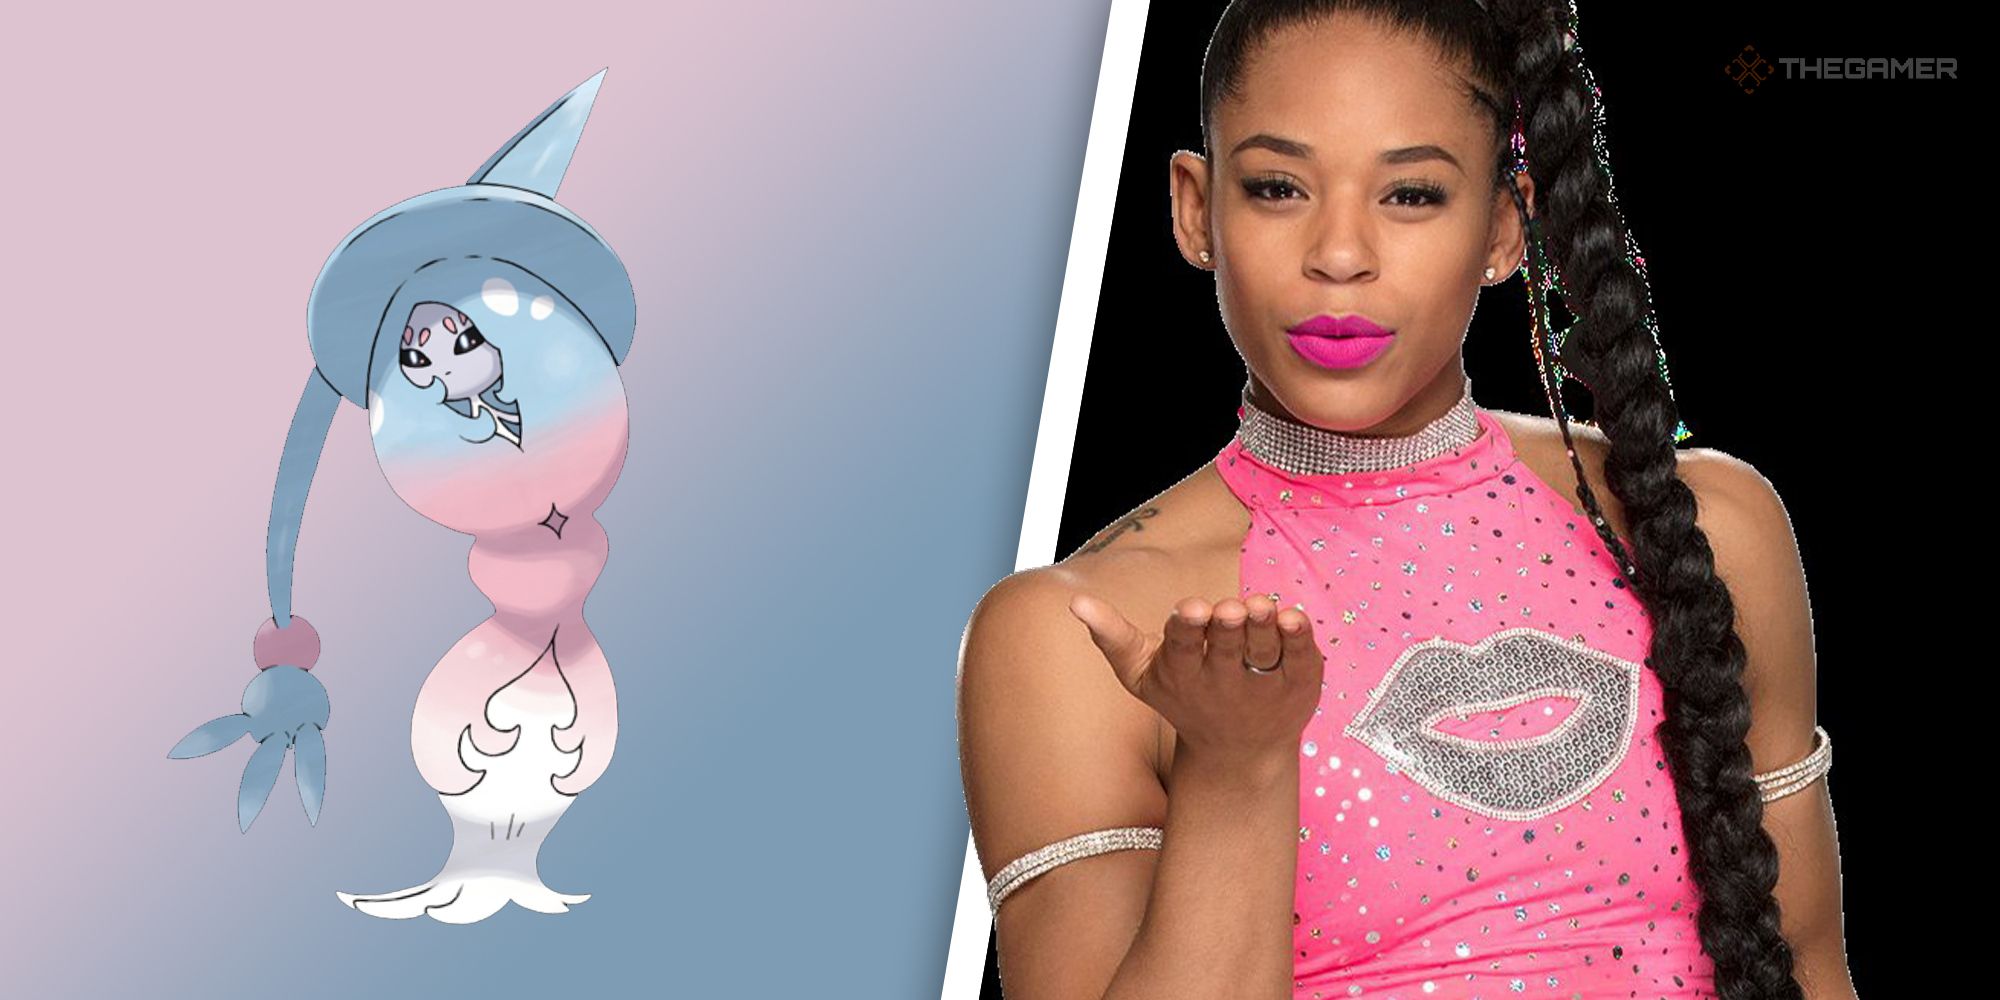 Here’s 30 Wrestlers As Pokemon For The Royal Rumble